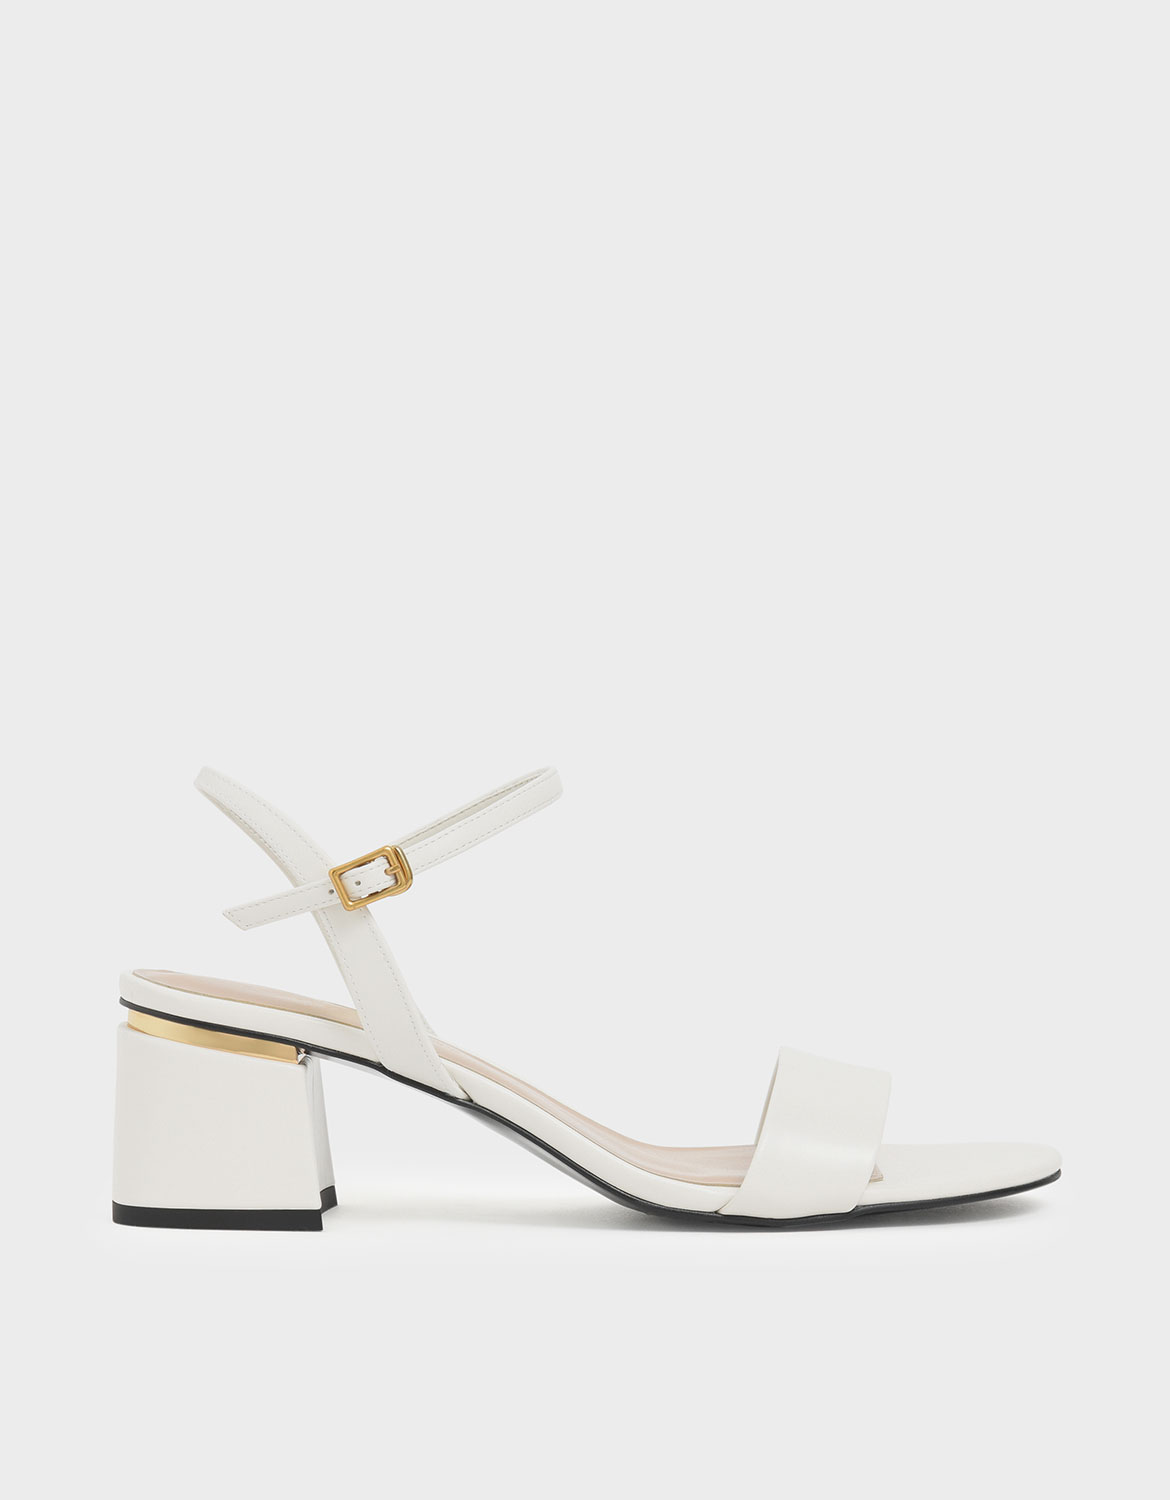 Back To Office | Work Shoes | Spring 2022 - CHARLES & KEITH UY